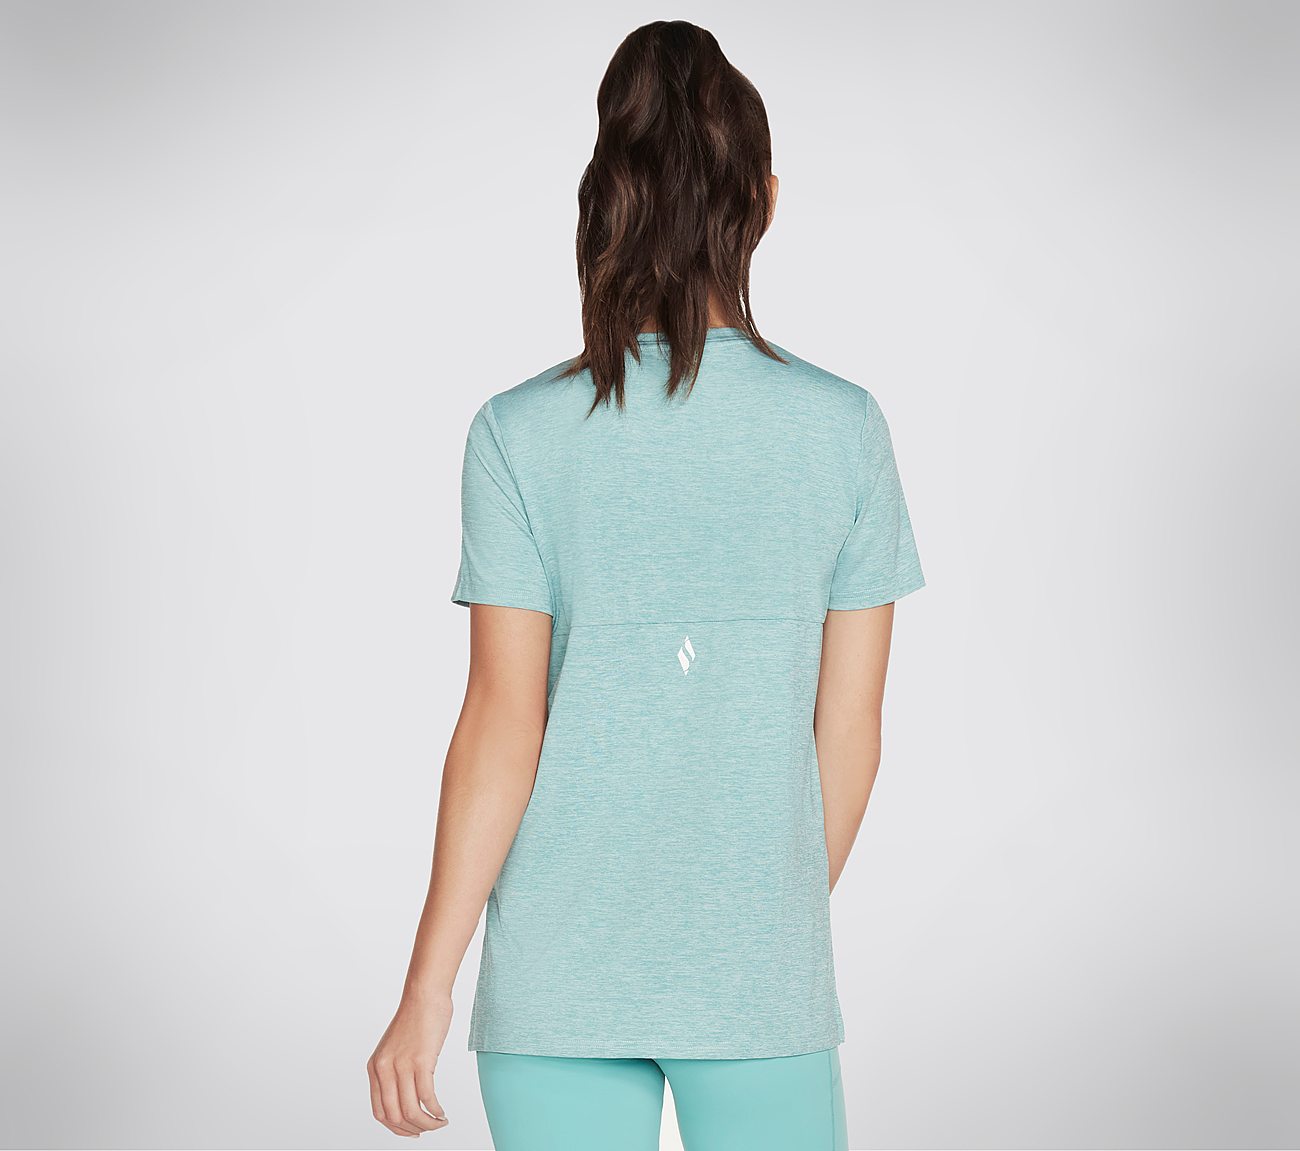 DIAMOND BLISSFUL TEE, TURQUOISE Apparel Top View